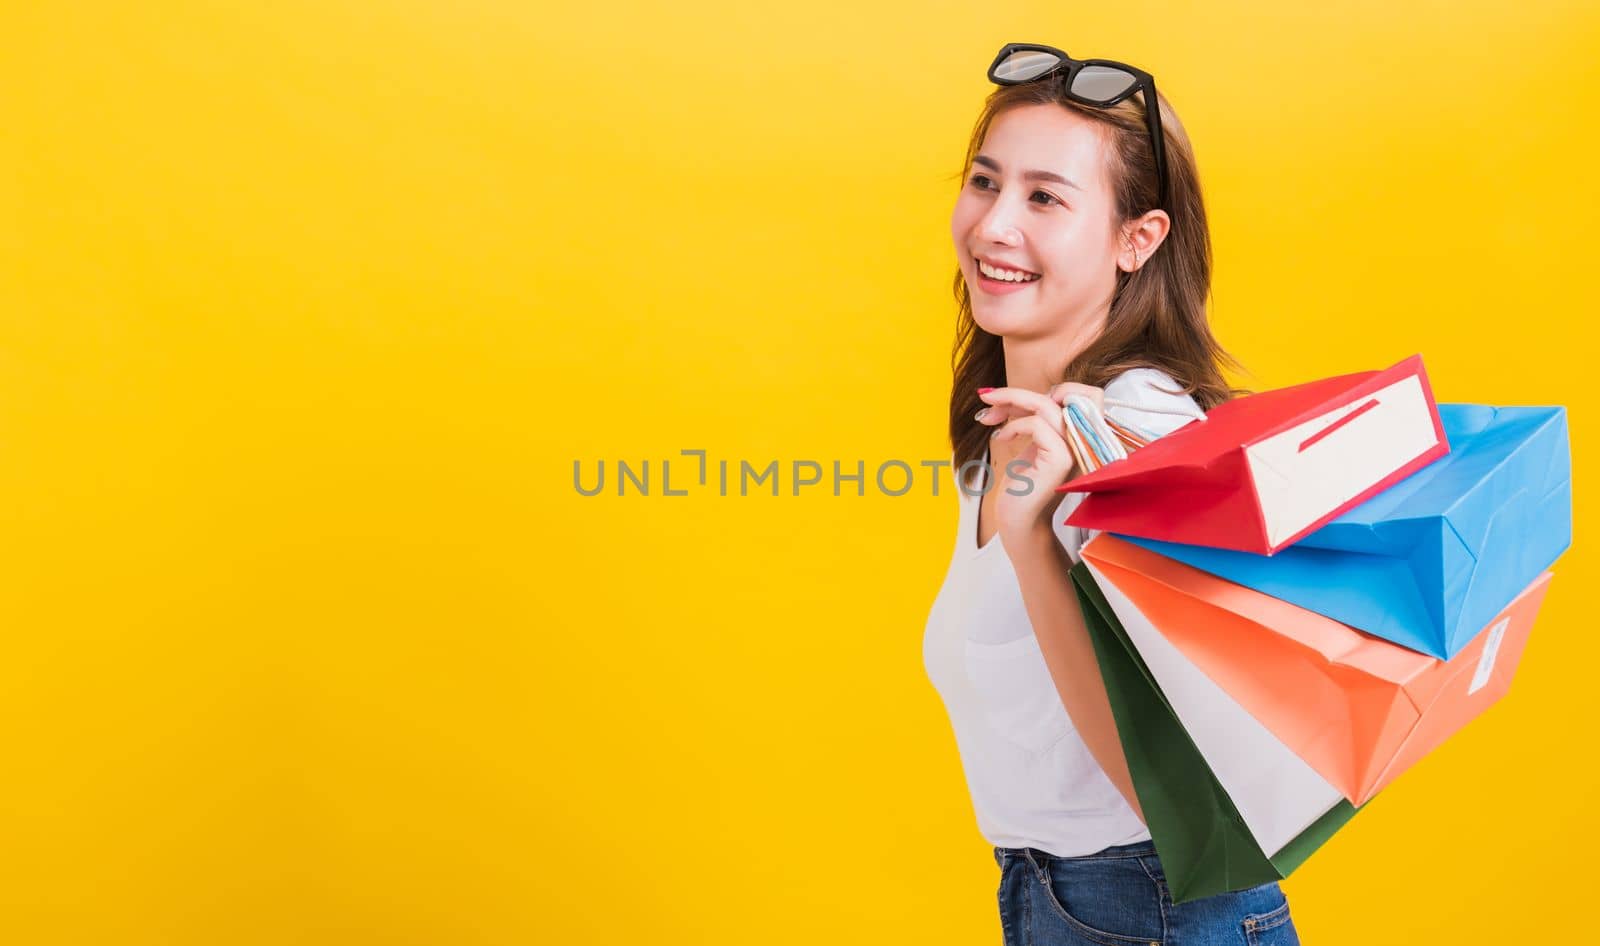 Asian Thai portrait happy beautiful cute young woman smiling stand with sunglasses excited holding shopping bags multi color looking side, studio shot isolated yellow background with copy space